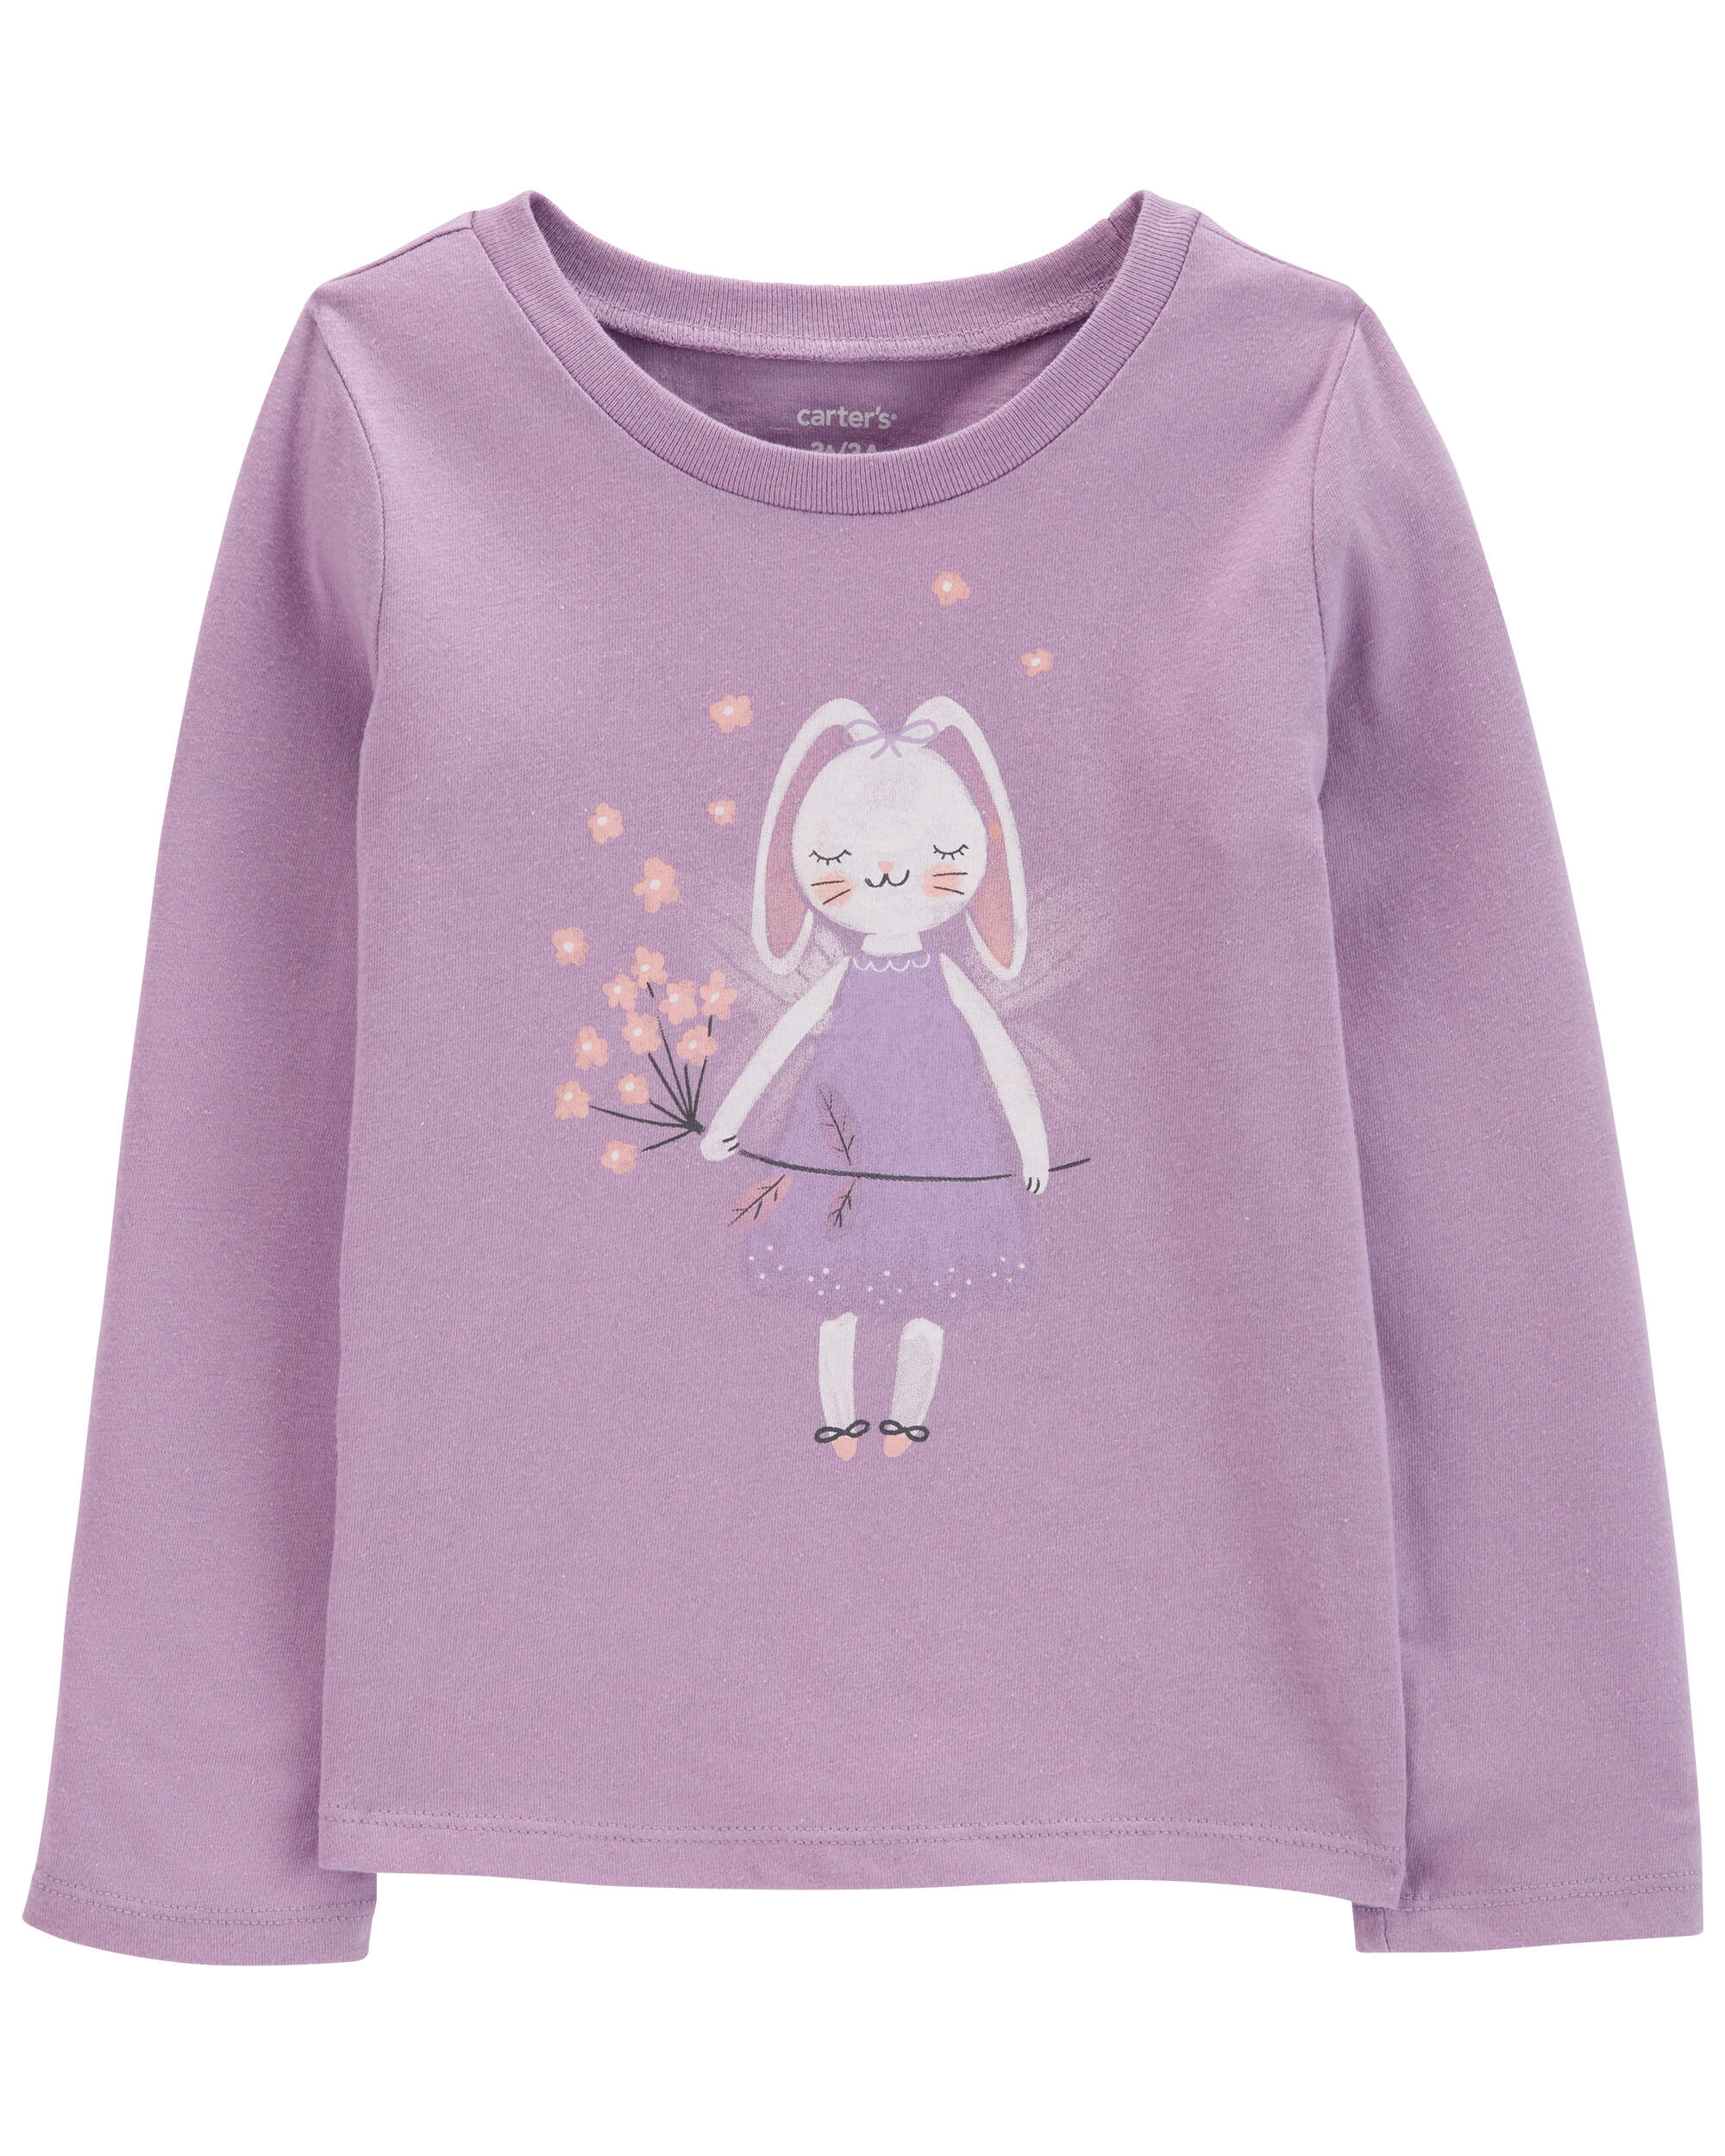 Toddler Bunny Long-Sleeve Graphic Tee